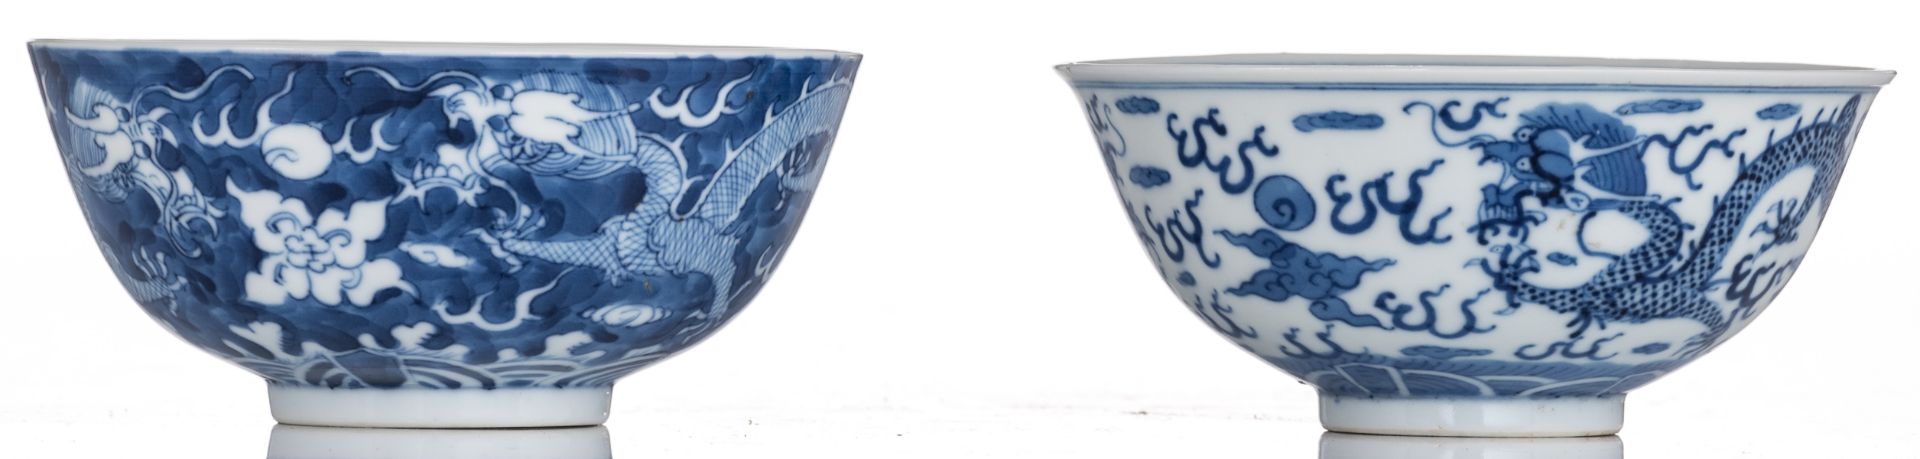 Two Chinese blue and white dragon decorated bowls, with a Kangxi mark, H 5,5 - 6 - ø 12,5 - 13 cm - Image 2 of 7